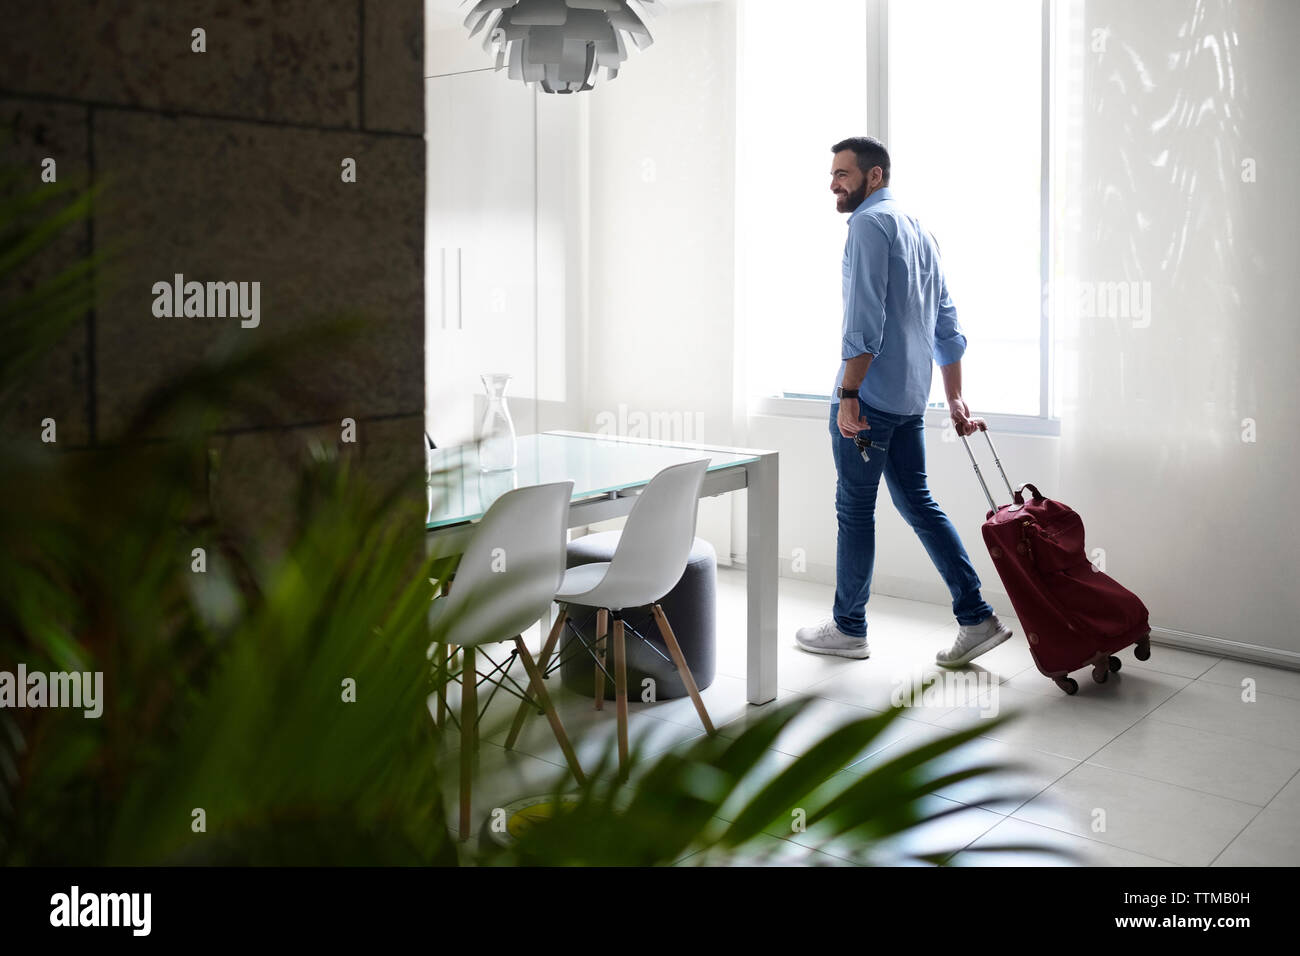 Full length of young man with luggage walking in rental house Stock Photo